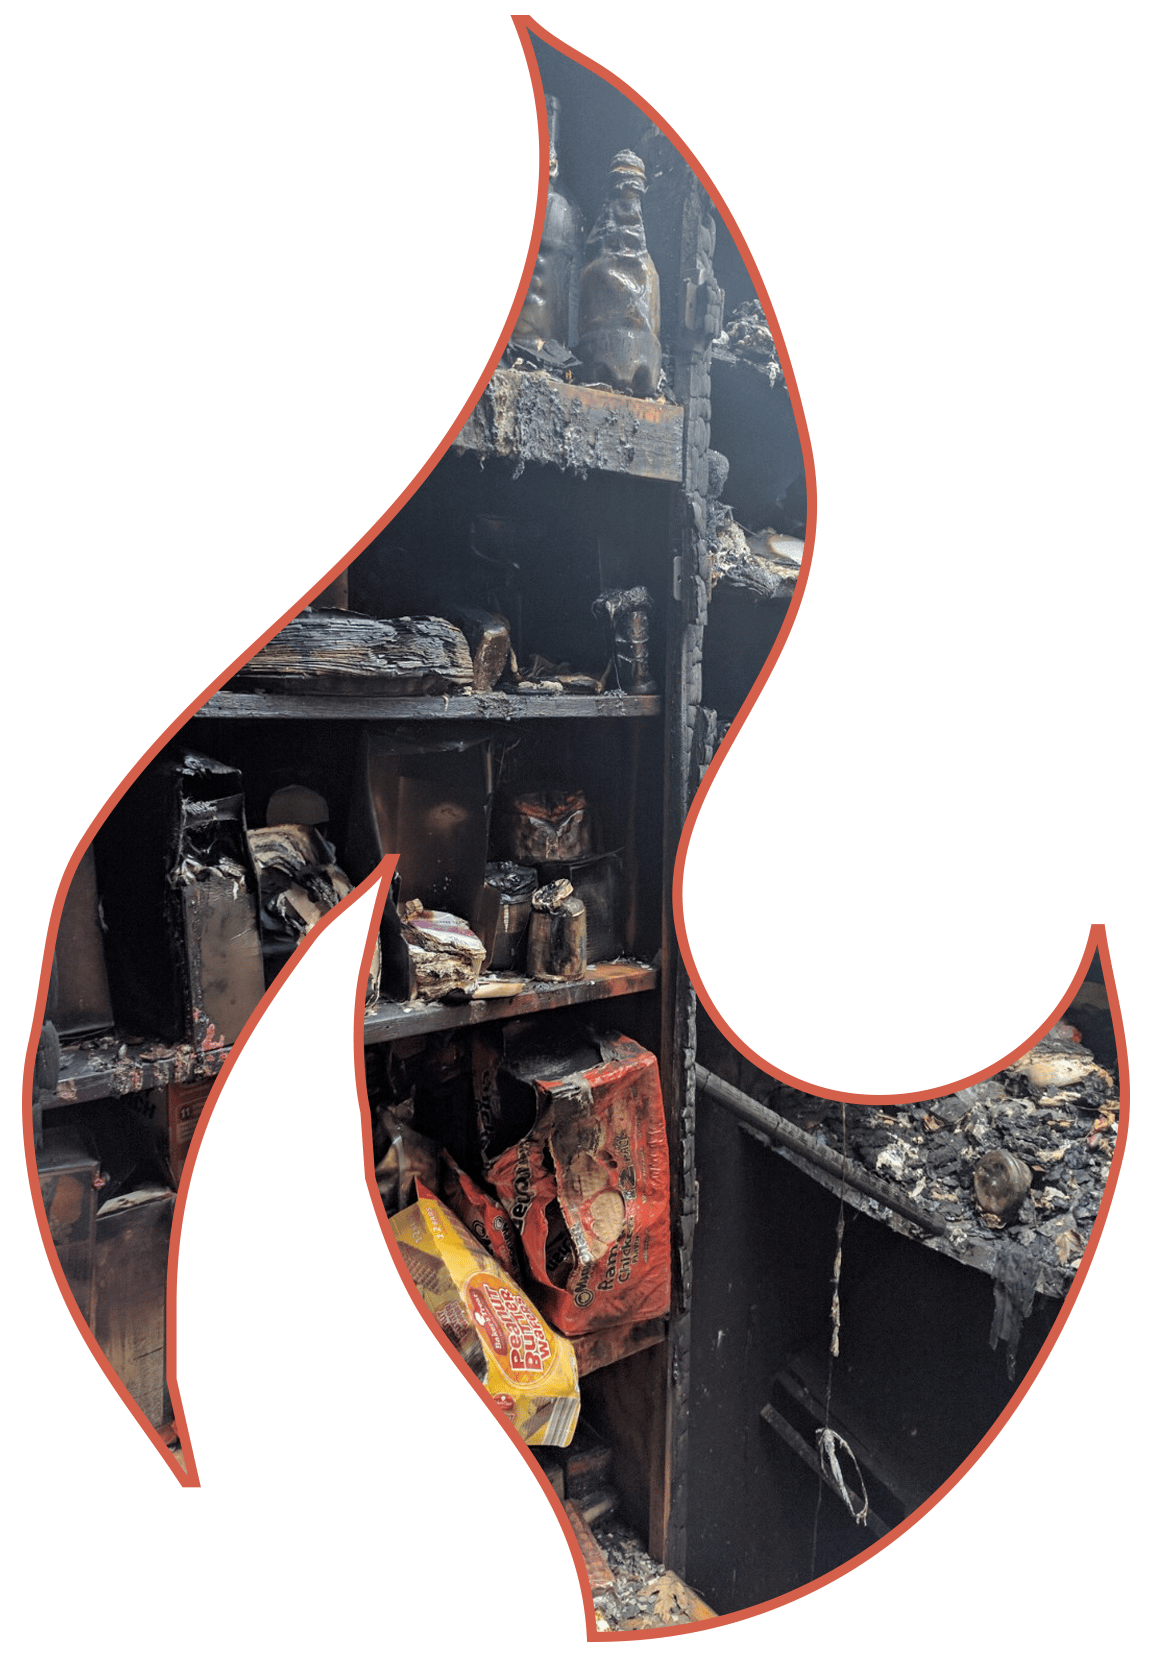 Fire-Damage-Page-Image.png_width_1500_height_2121_name_Fire-Damage-Page-Image